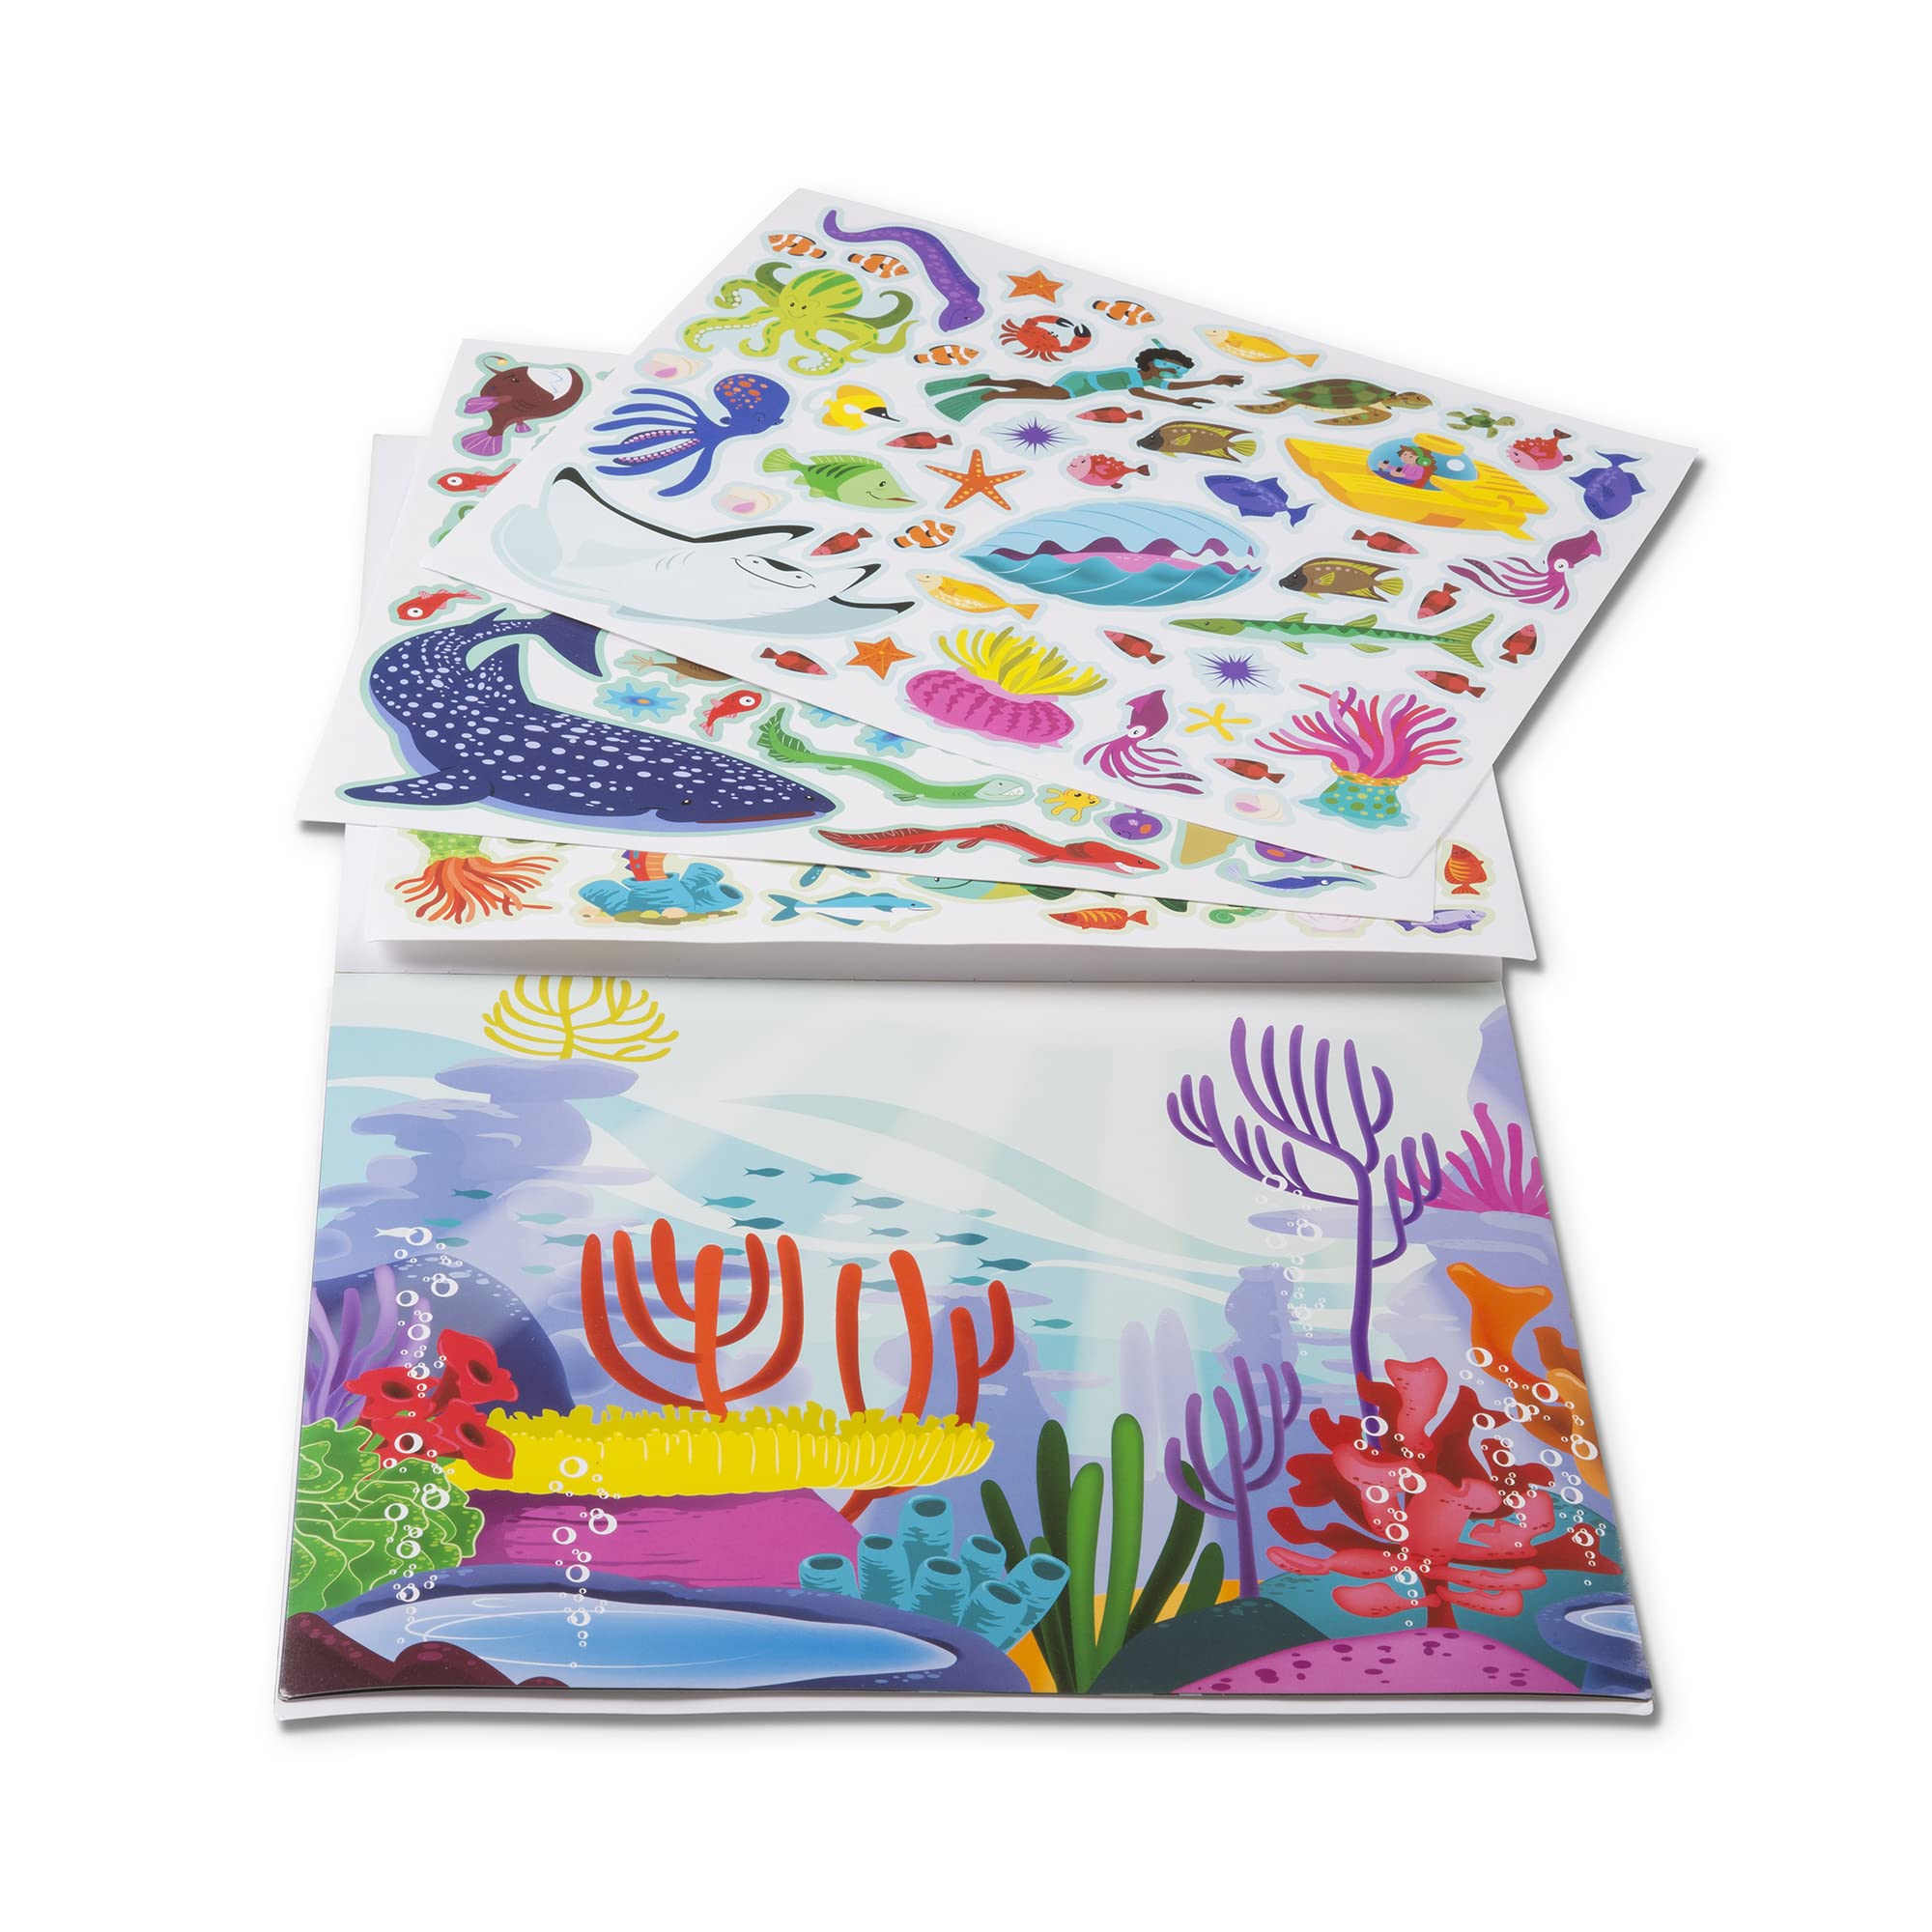 Melissa & Doug Reusable Sticker Pad Bundle - Jungle, Farm & Under the Sea - Art Activities For Kids, Restickable Stickers, Arts And Crafts For Kids Ages 3+